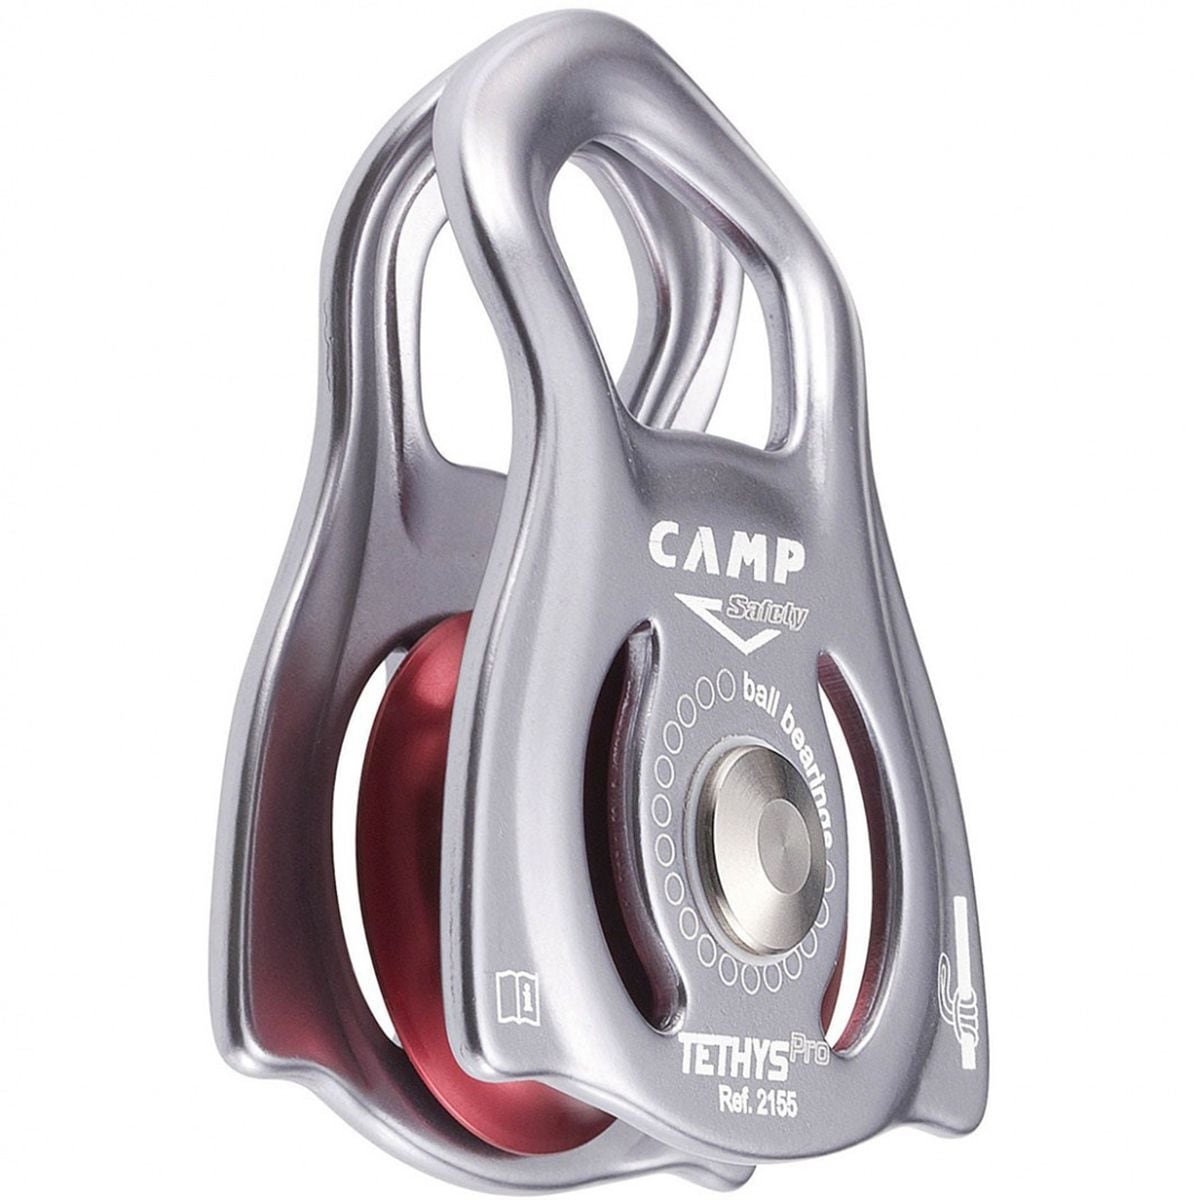 CAMP USA Tethys Pro Small Mobile Pulley